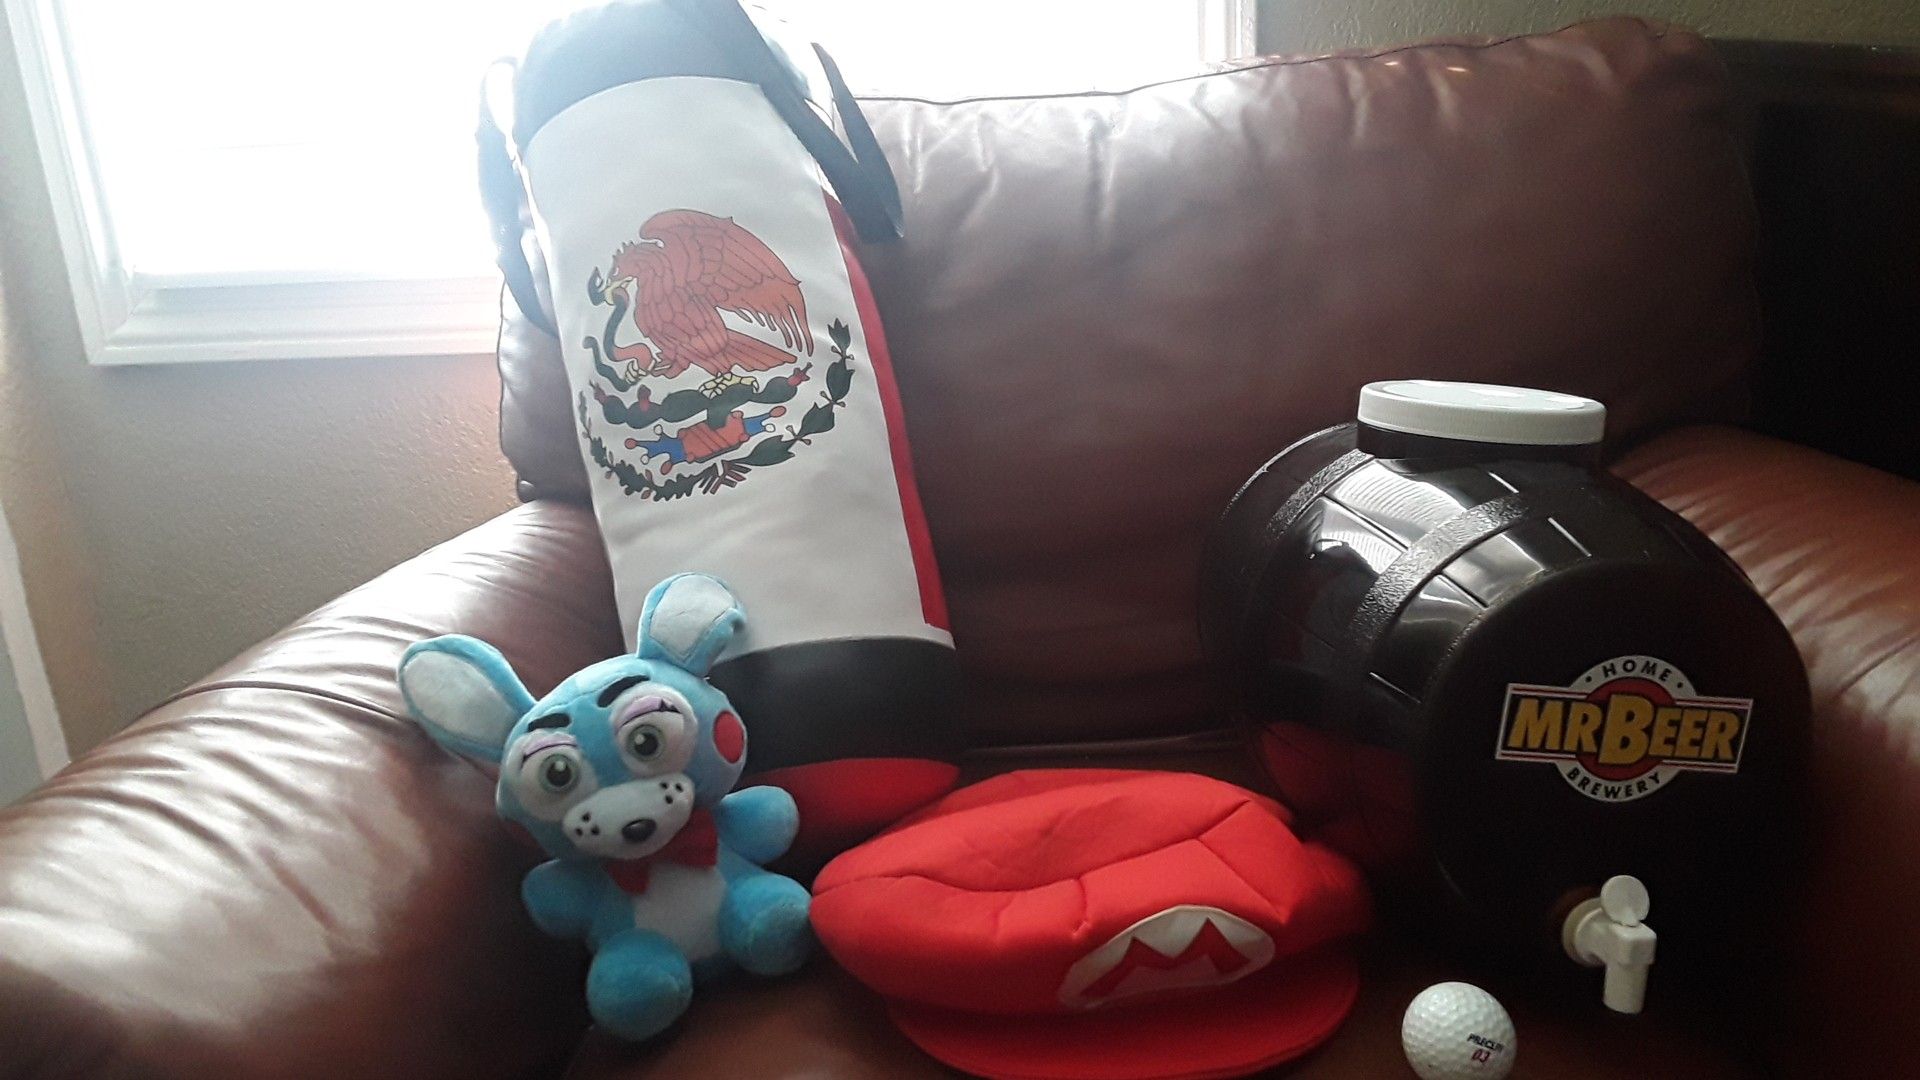 Random stuff (punching bag, Mario hat, golf ball, fnaf plushie and a home brewery Mr beer.